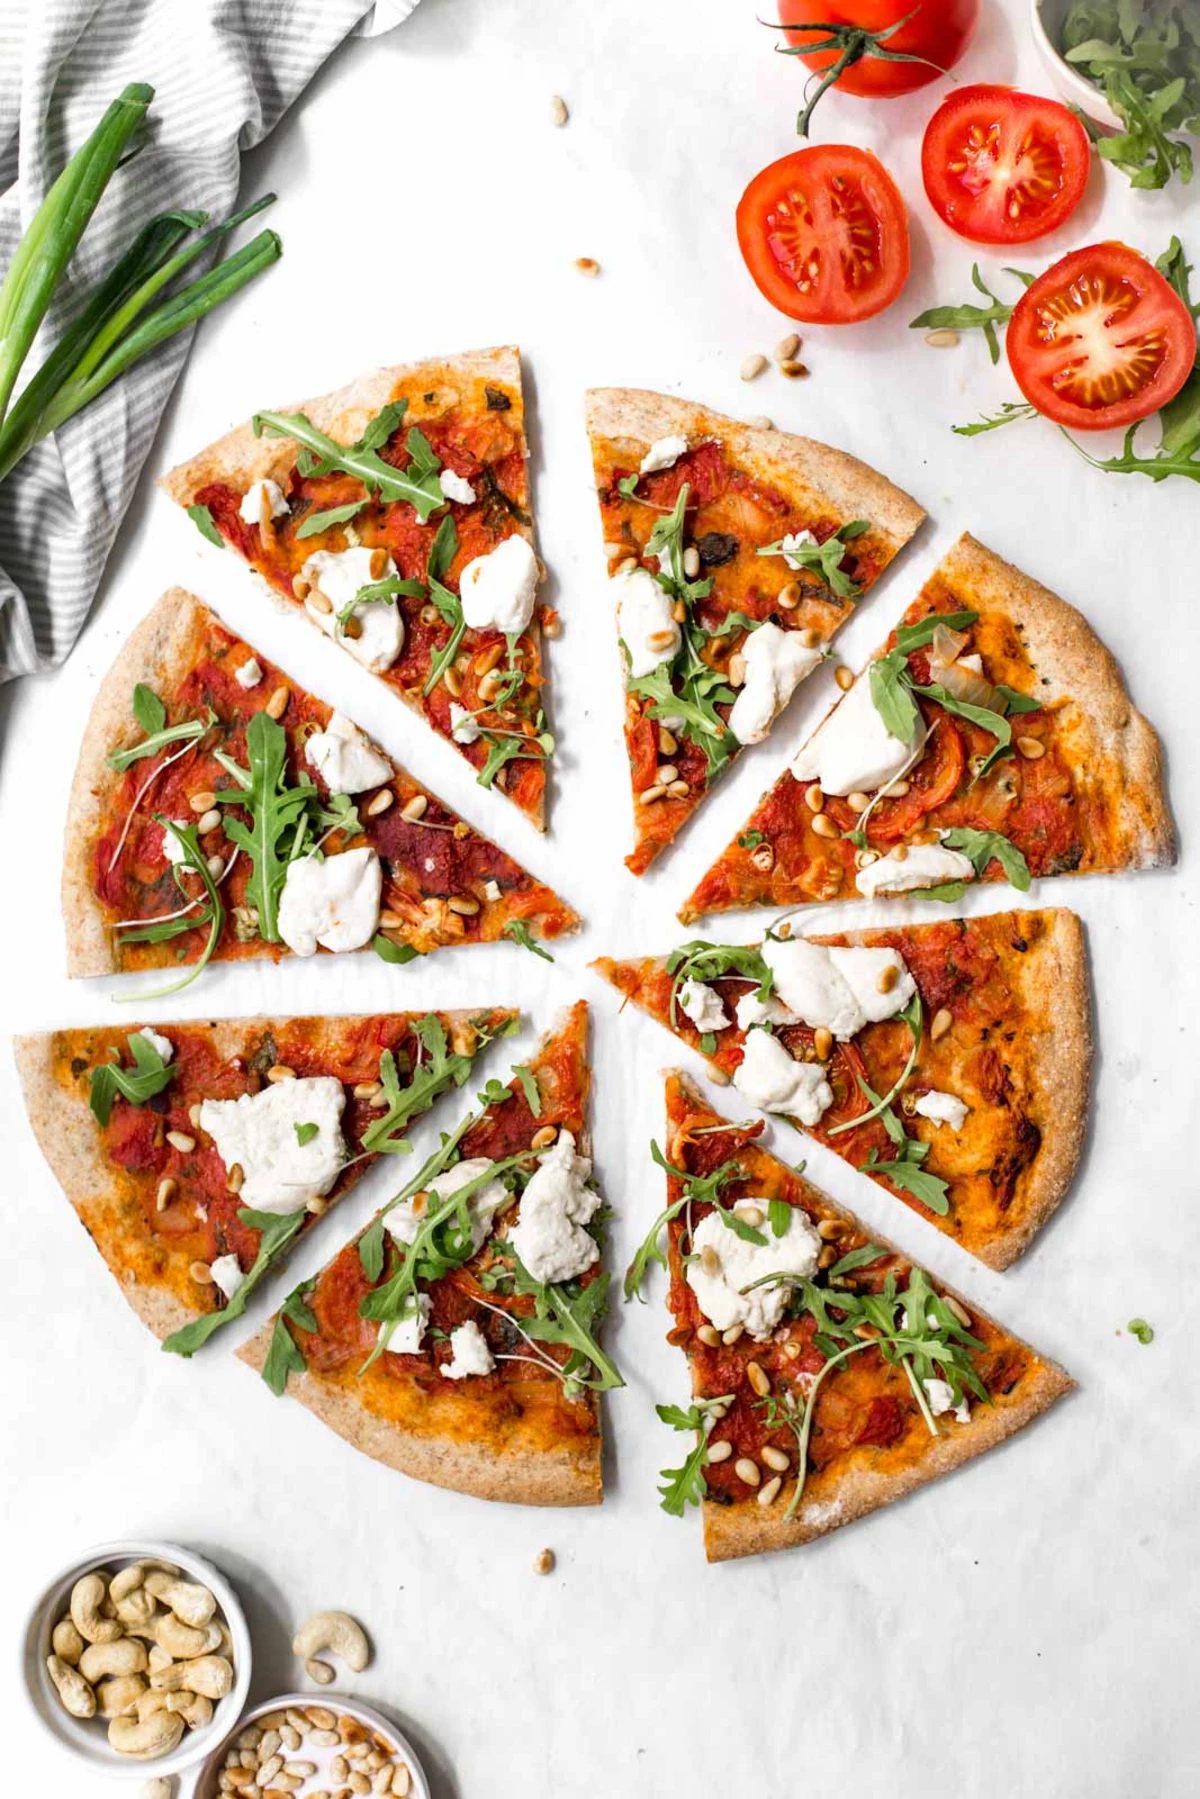 The Most Drool-Worthy Vegan Cheese Pizza Ever